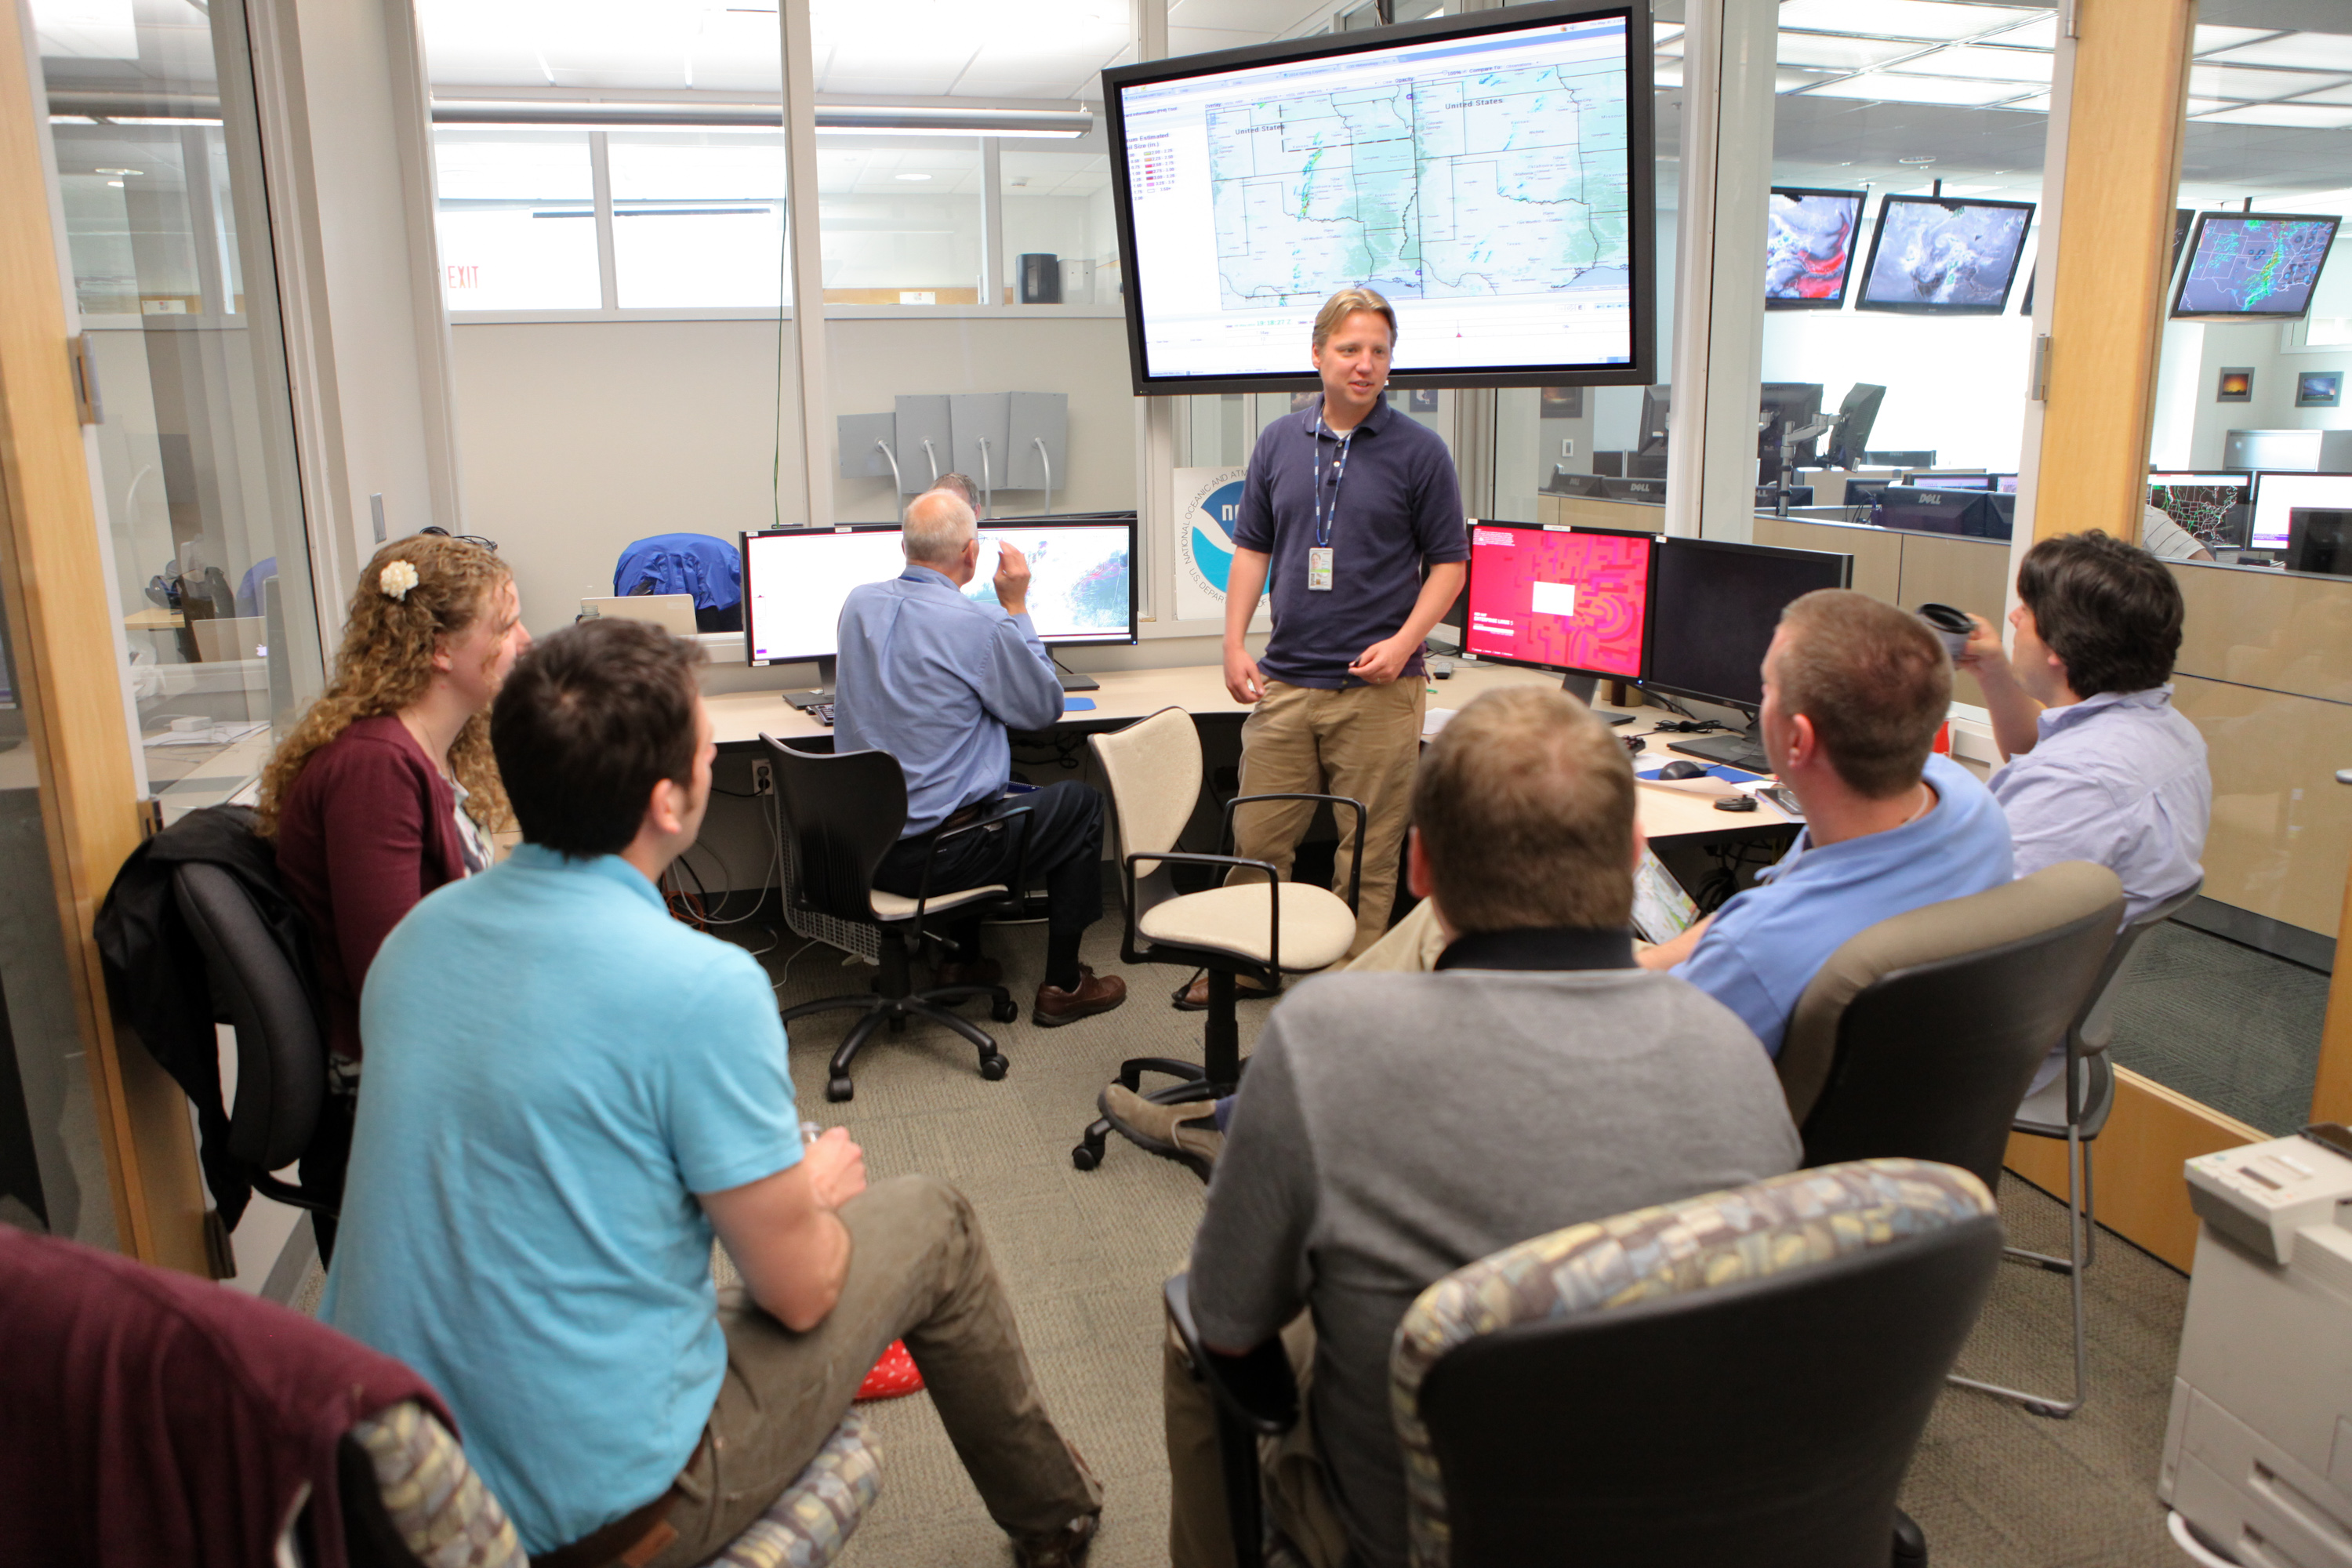 Experimenters sit in a circle. Adam Clark stands in front of monitors showing weather information.